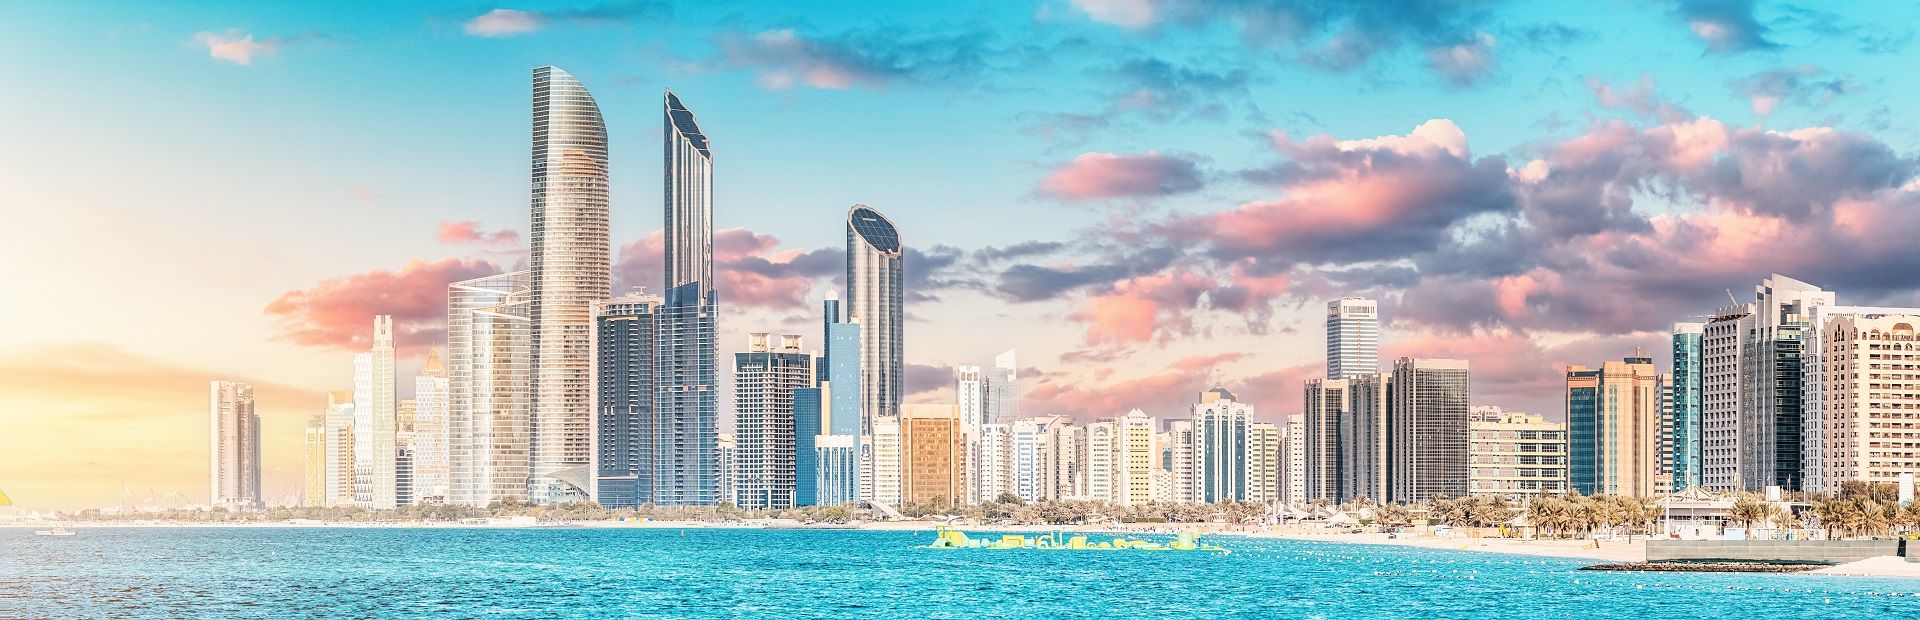 The list of top tourist places in Abu Dhabi